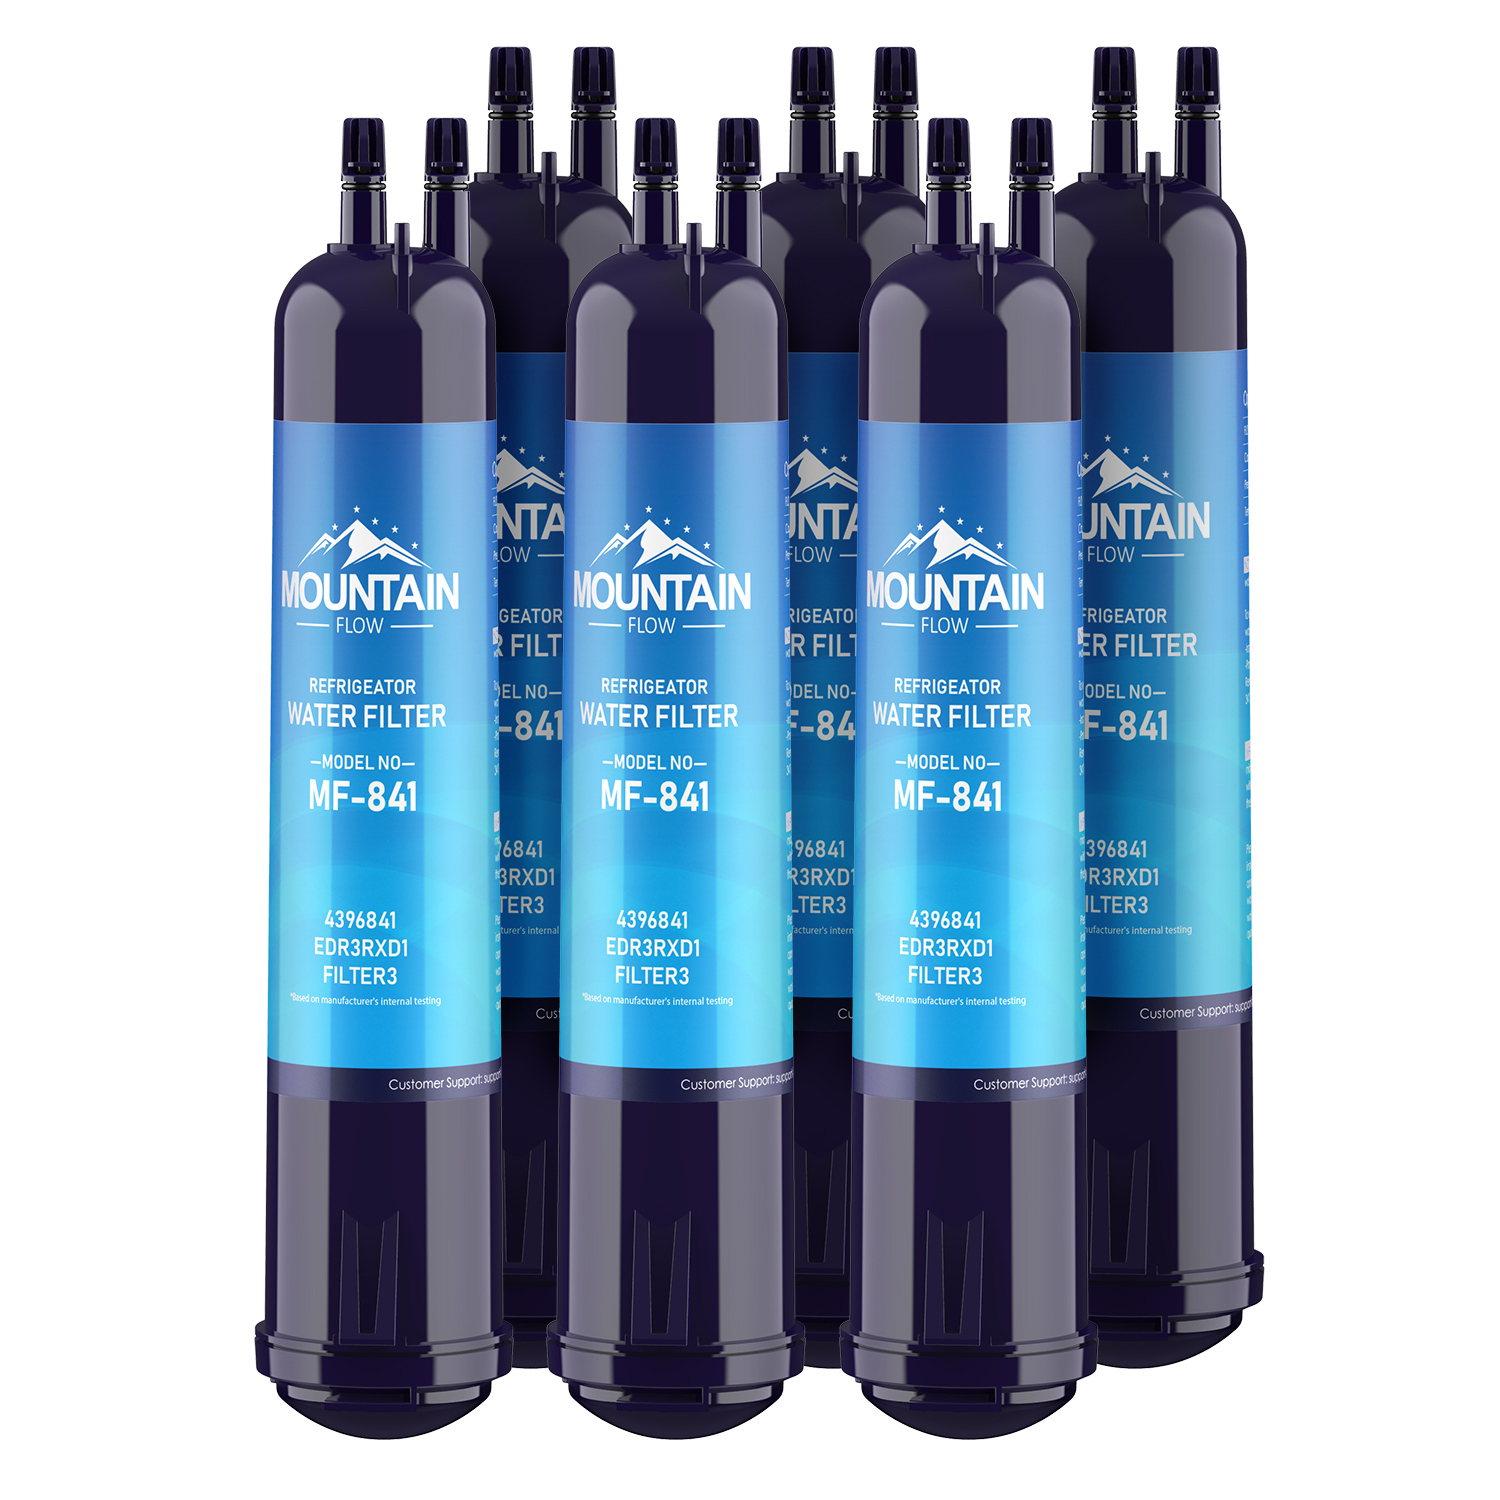 6pk EDR3RXD1 Water Filter Compatible 4396841 Filter 3 by MountainFlow